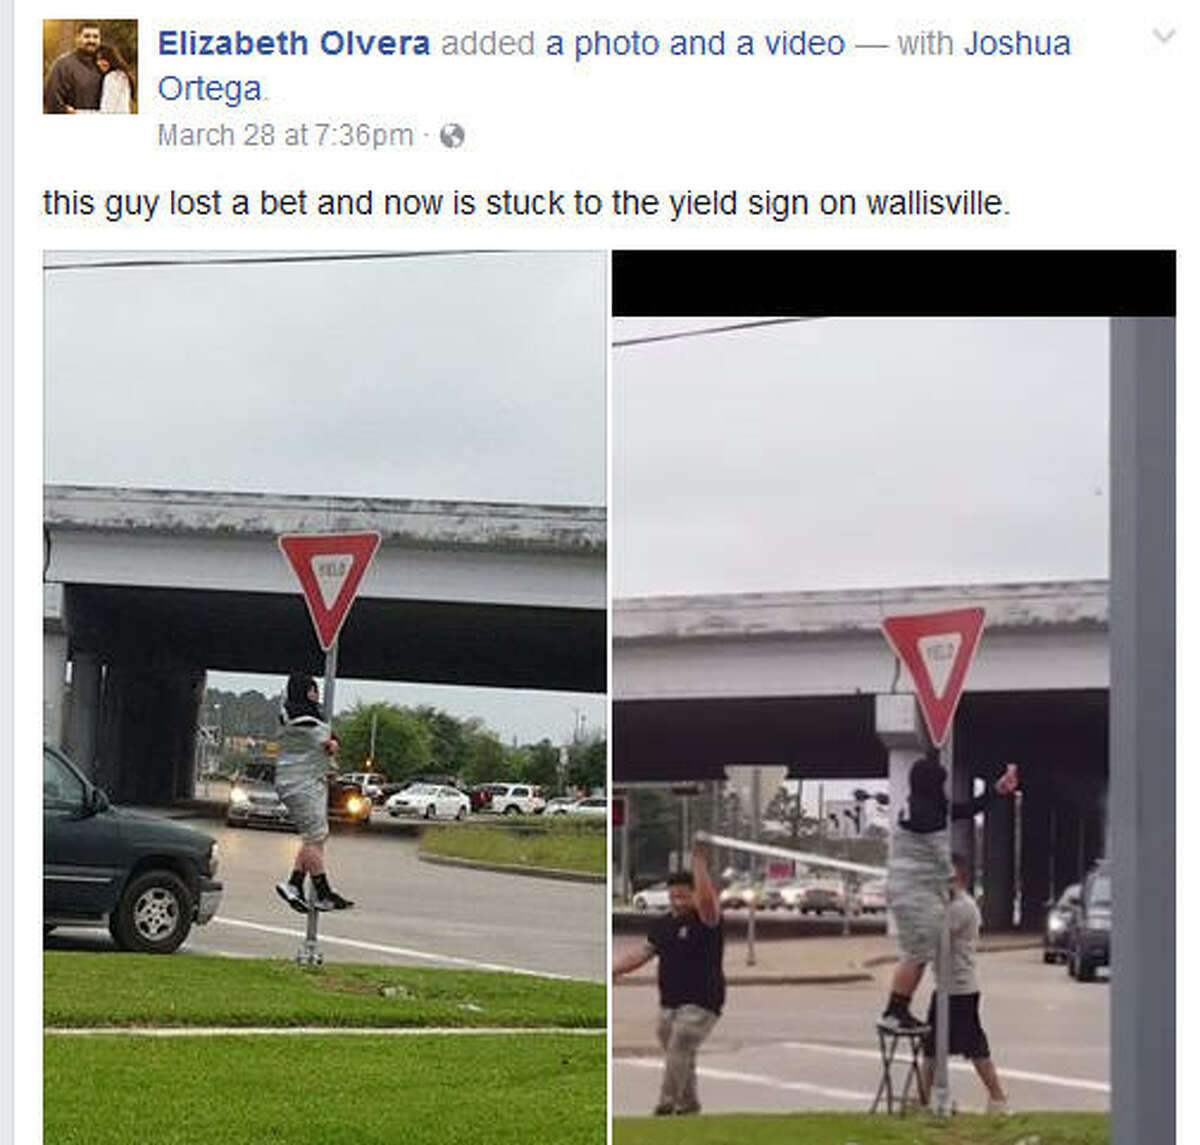 This man was left taped to a yield sign pole near in east Harris County after he lost a bet. Apparently, no one was hurt or arrested in the incident. (Facebook via Elizabeth Olvera)